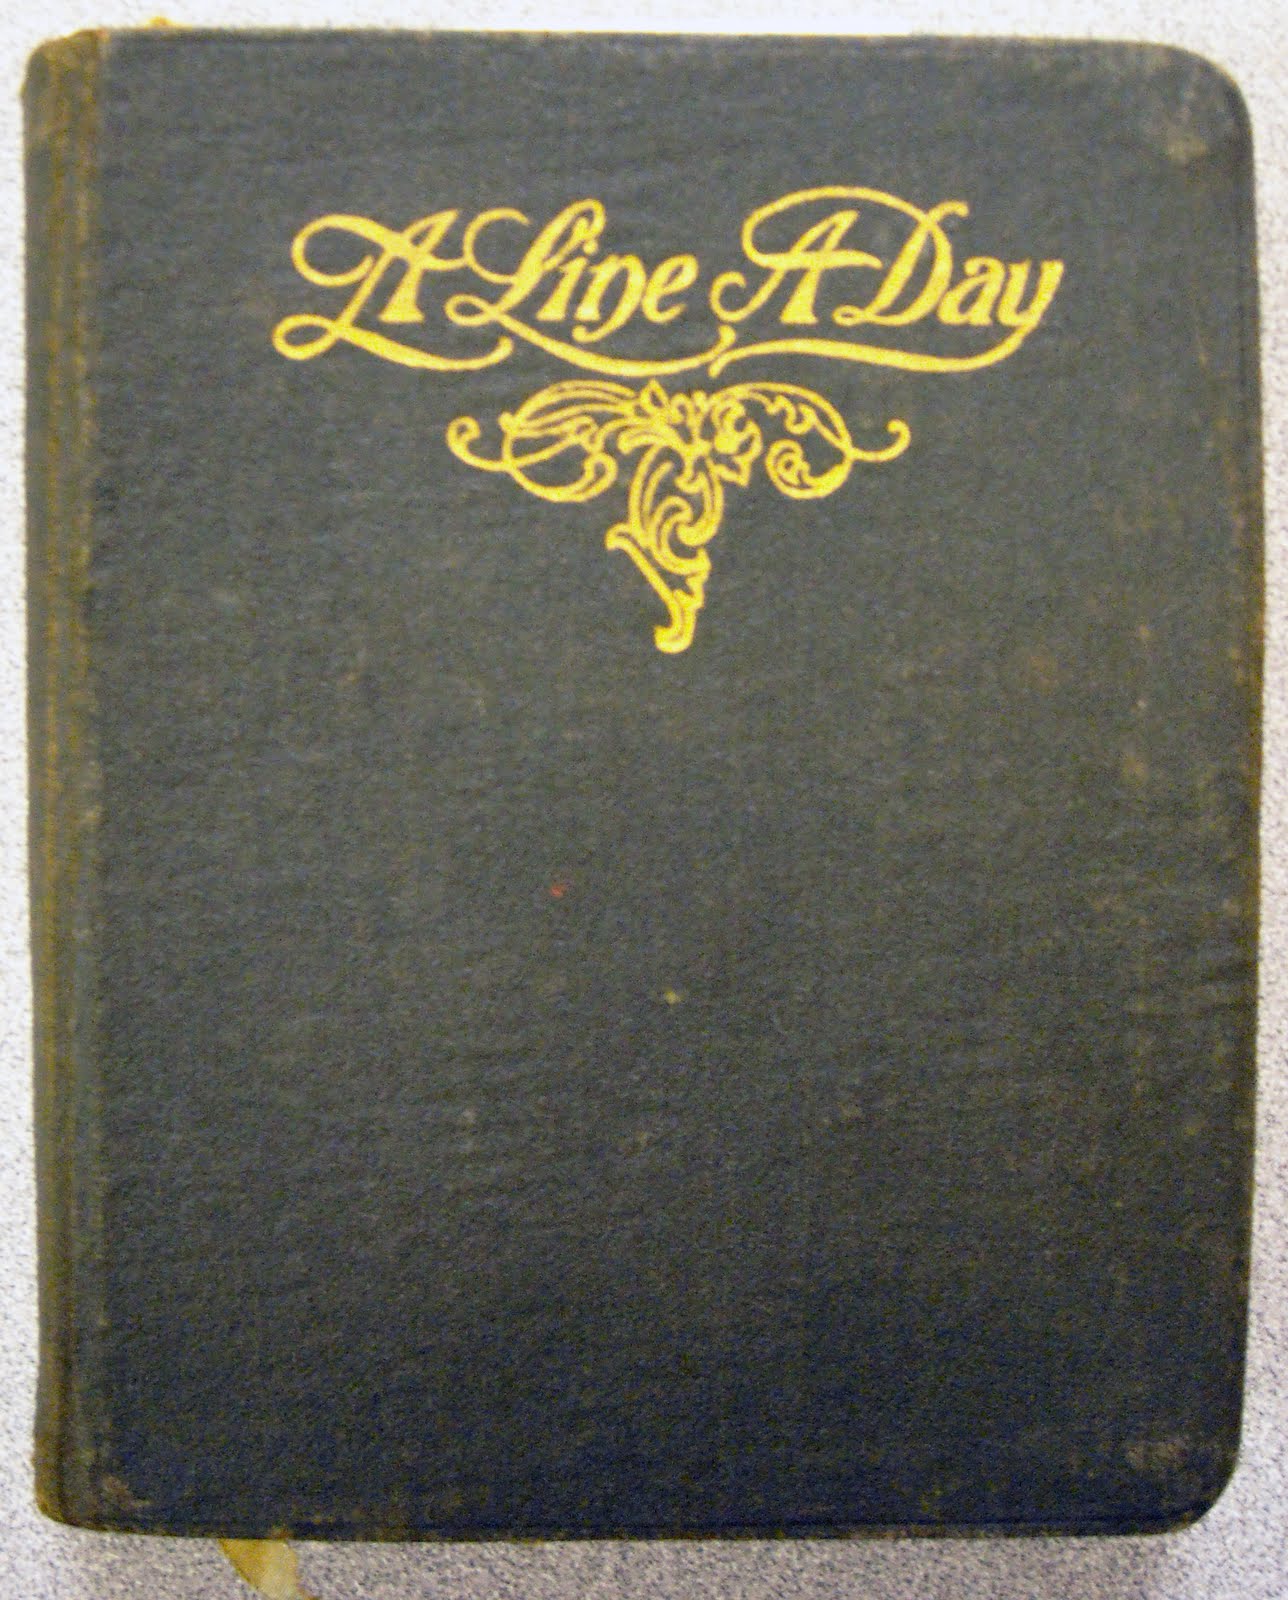 The front of a worn out diary, text: "A Line A Day"